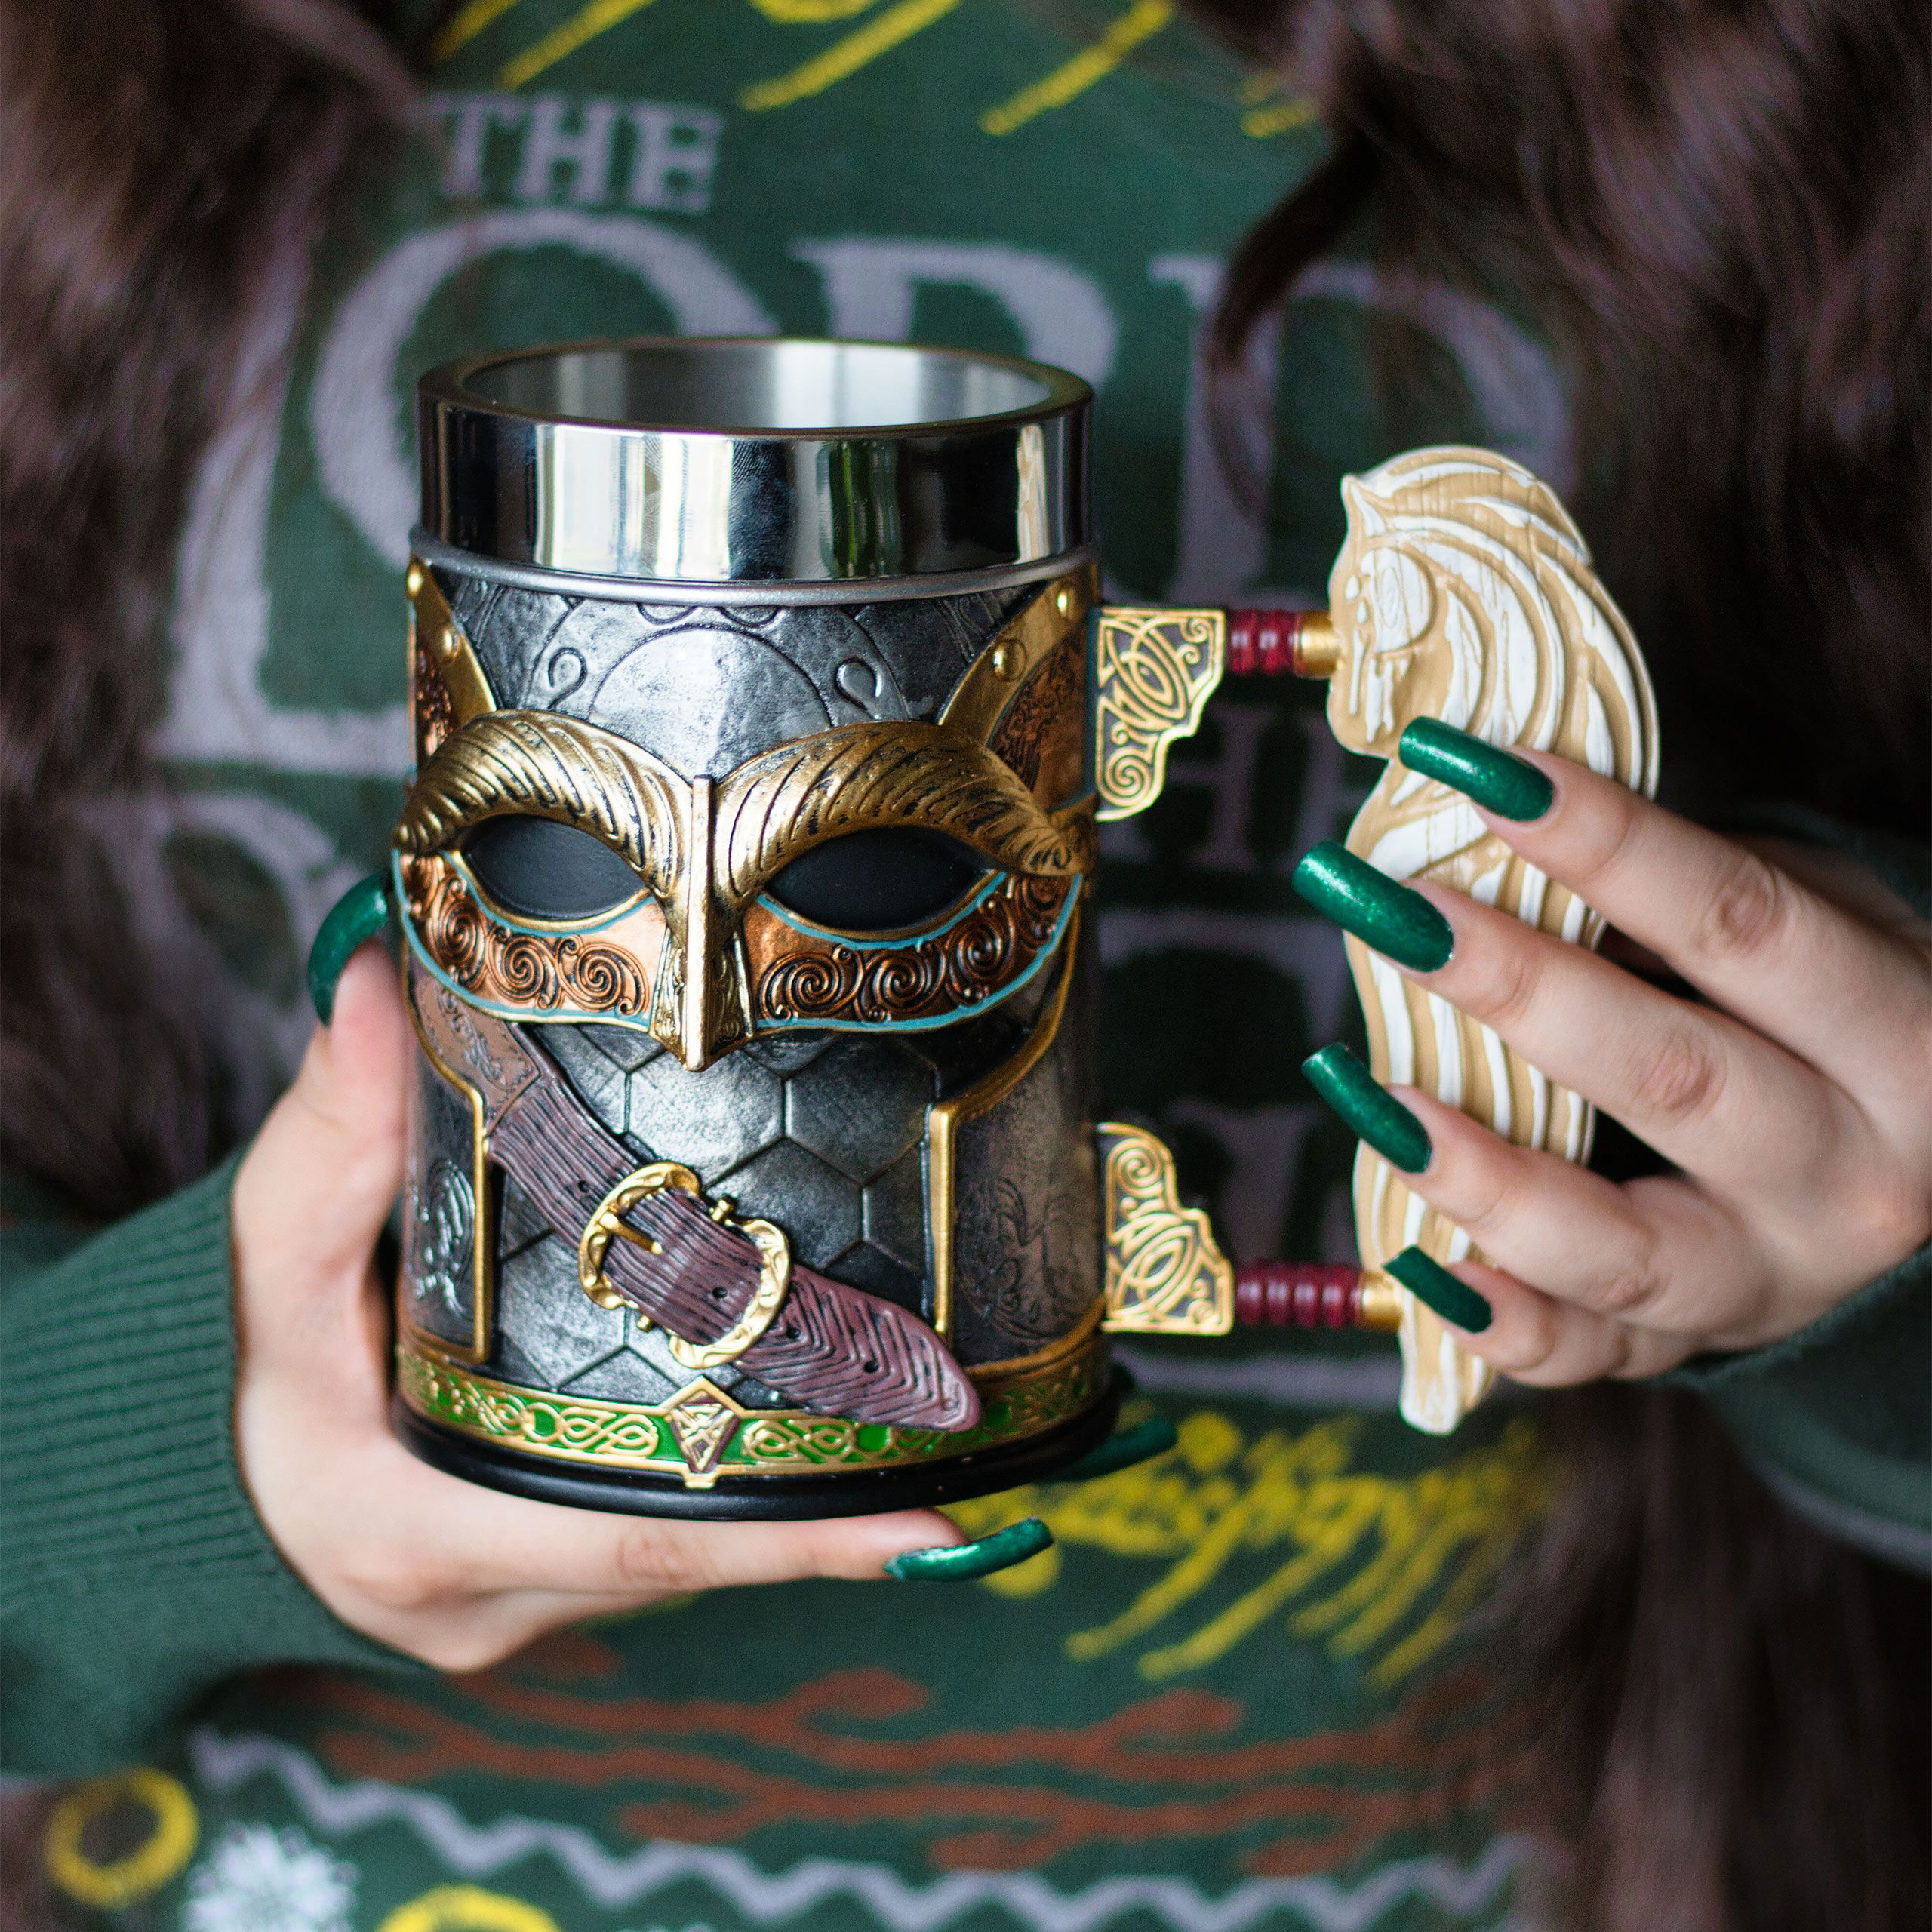 The Lord of The Rings Mug